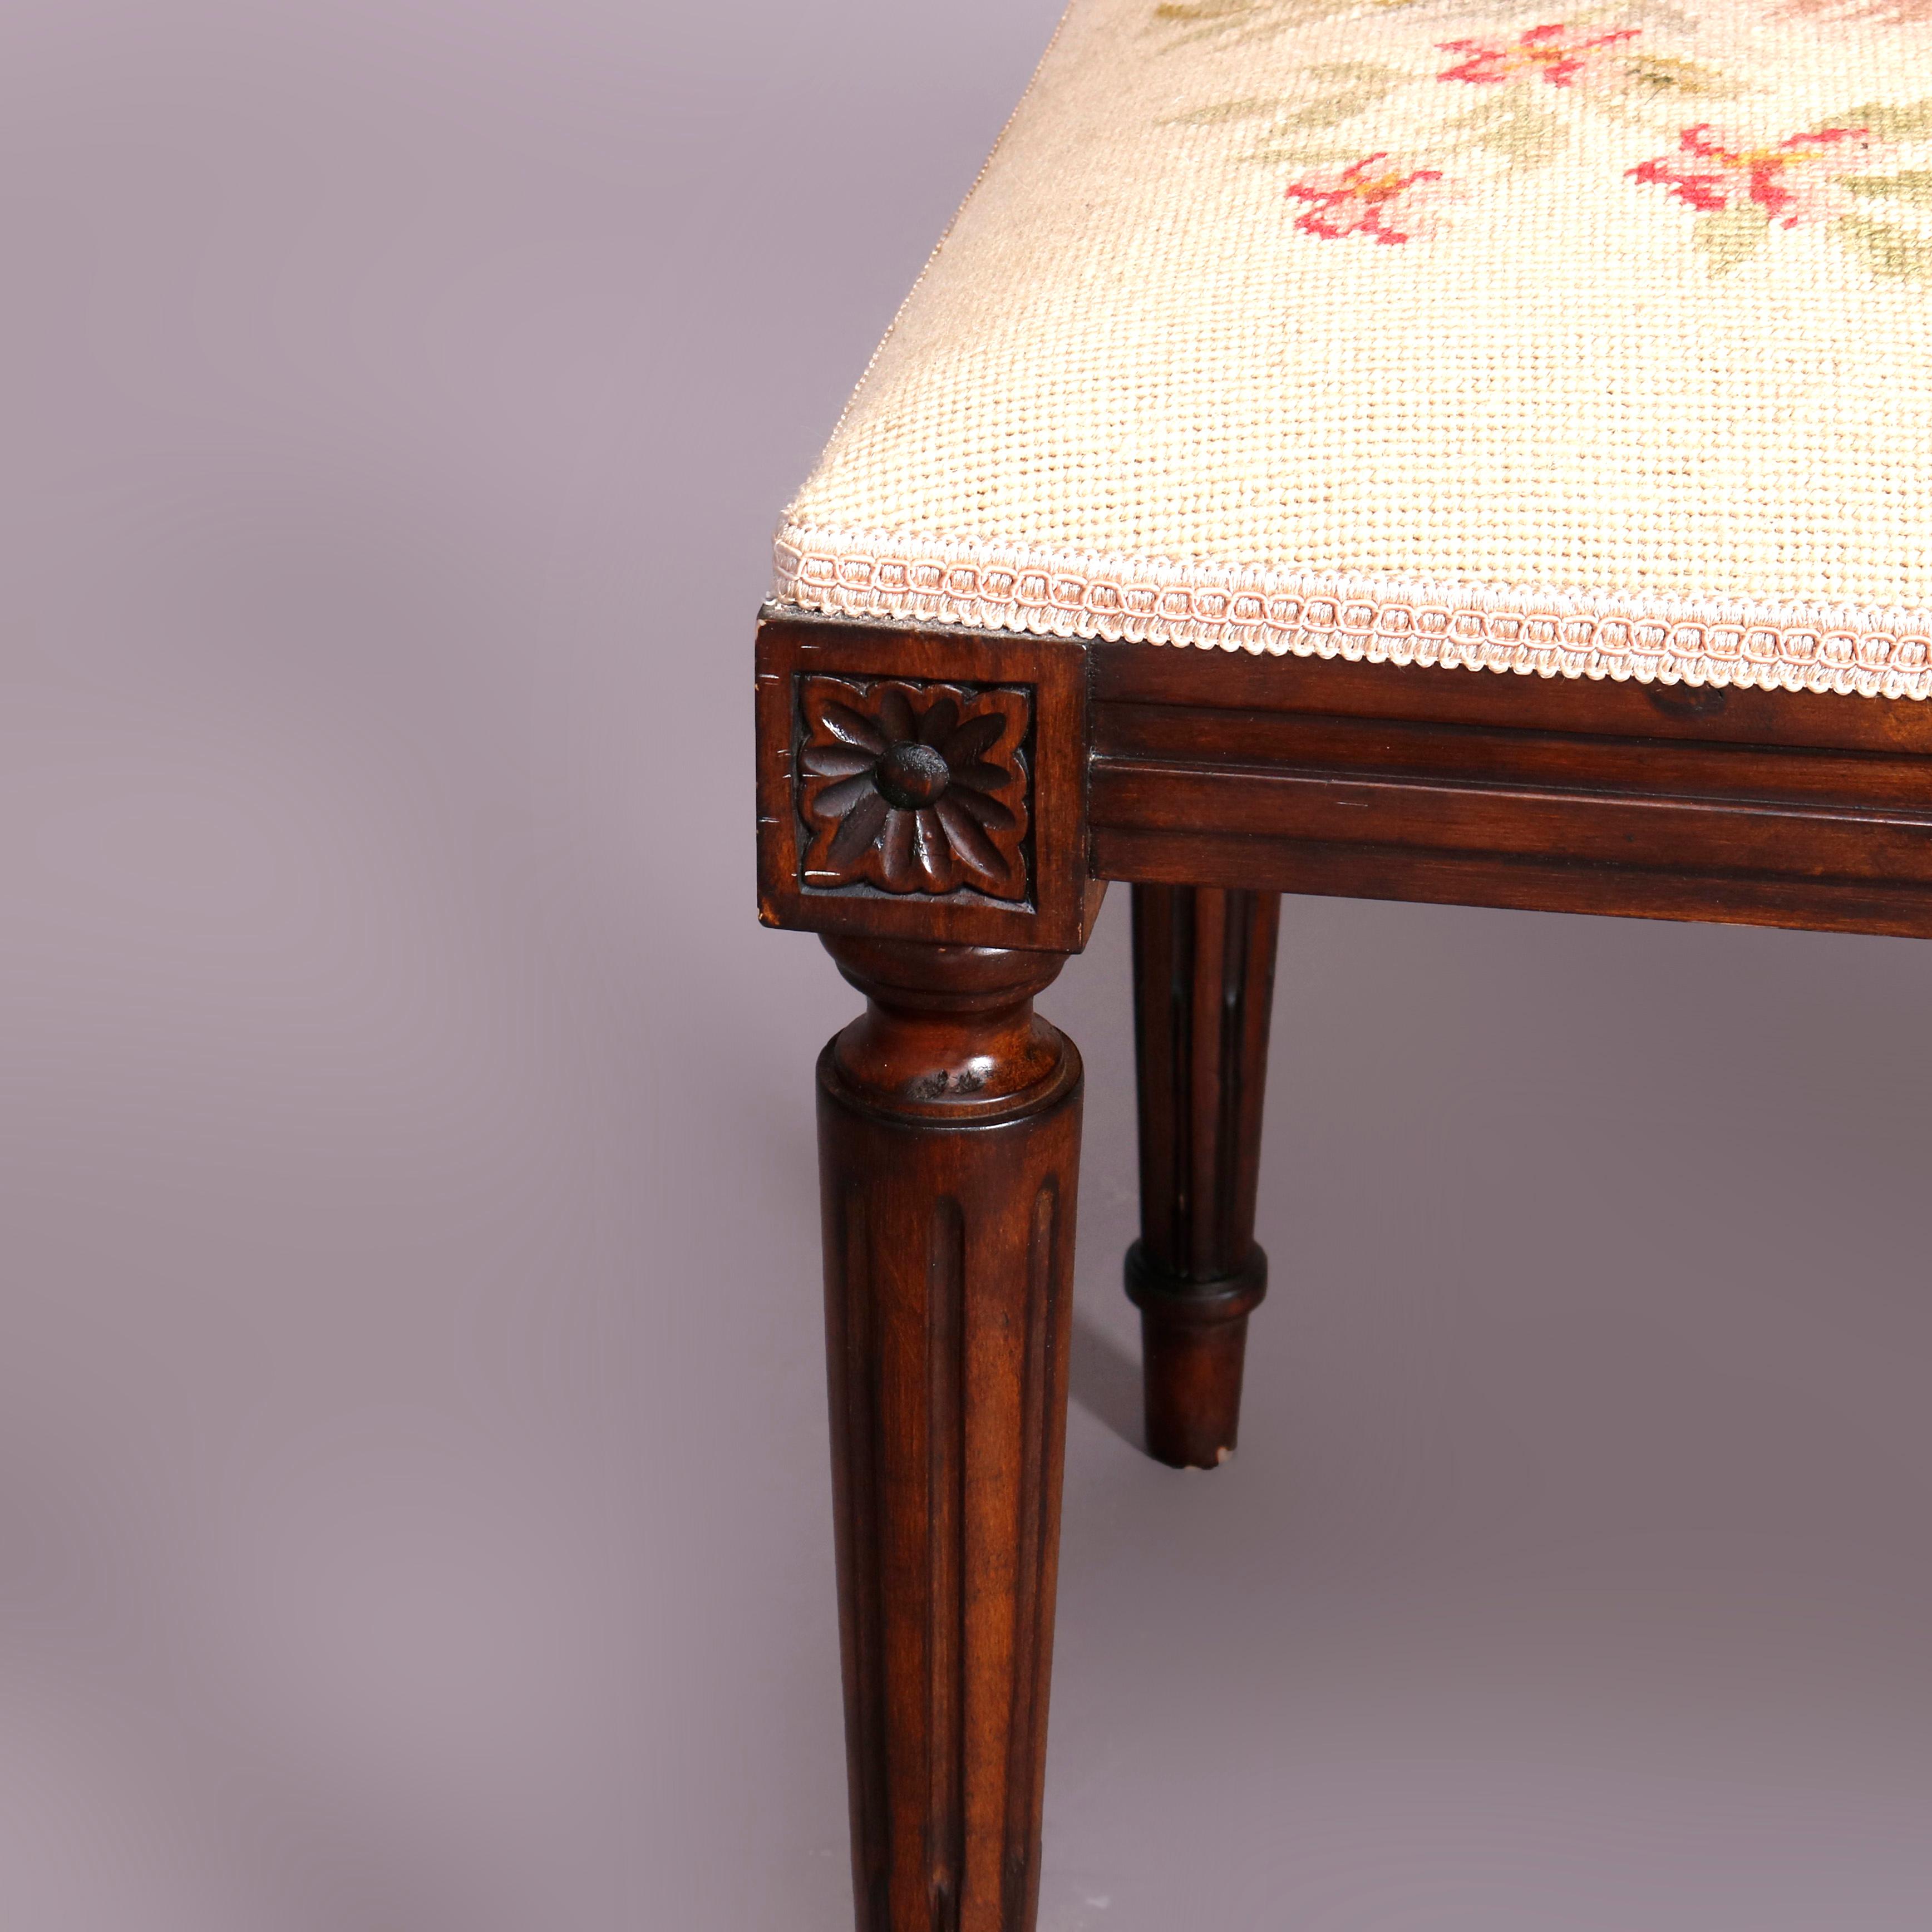 needlepoint piano bench cover